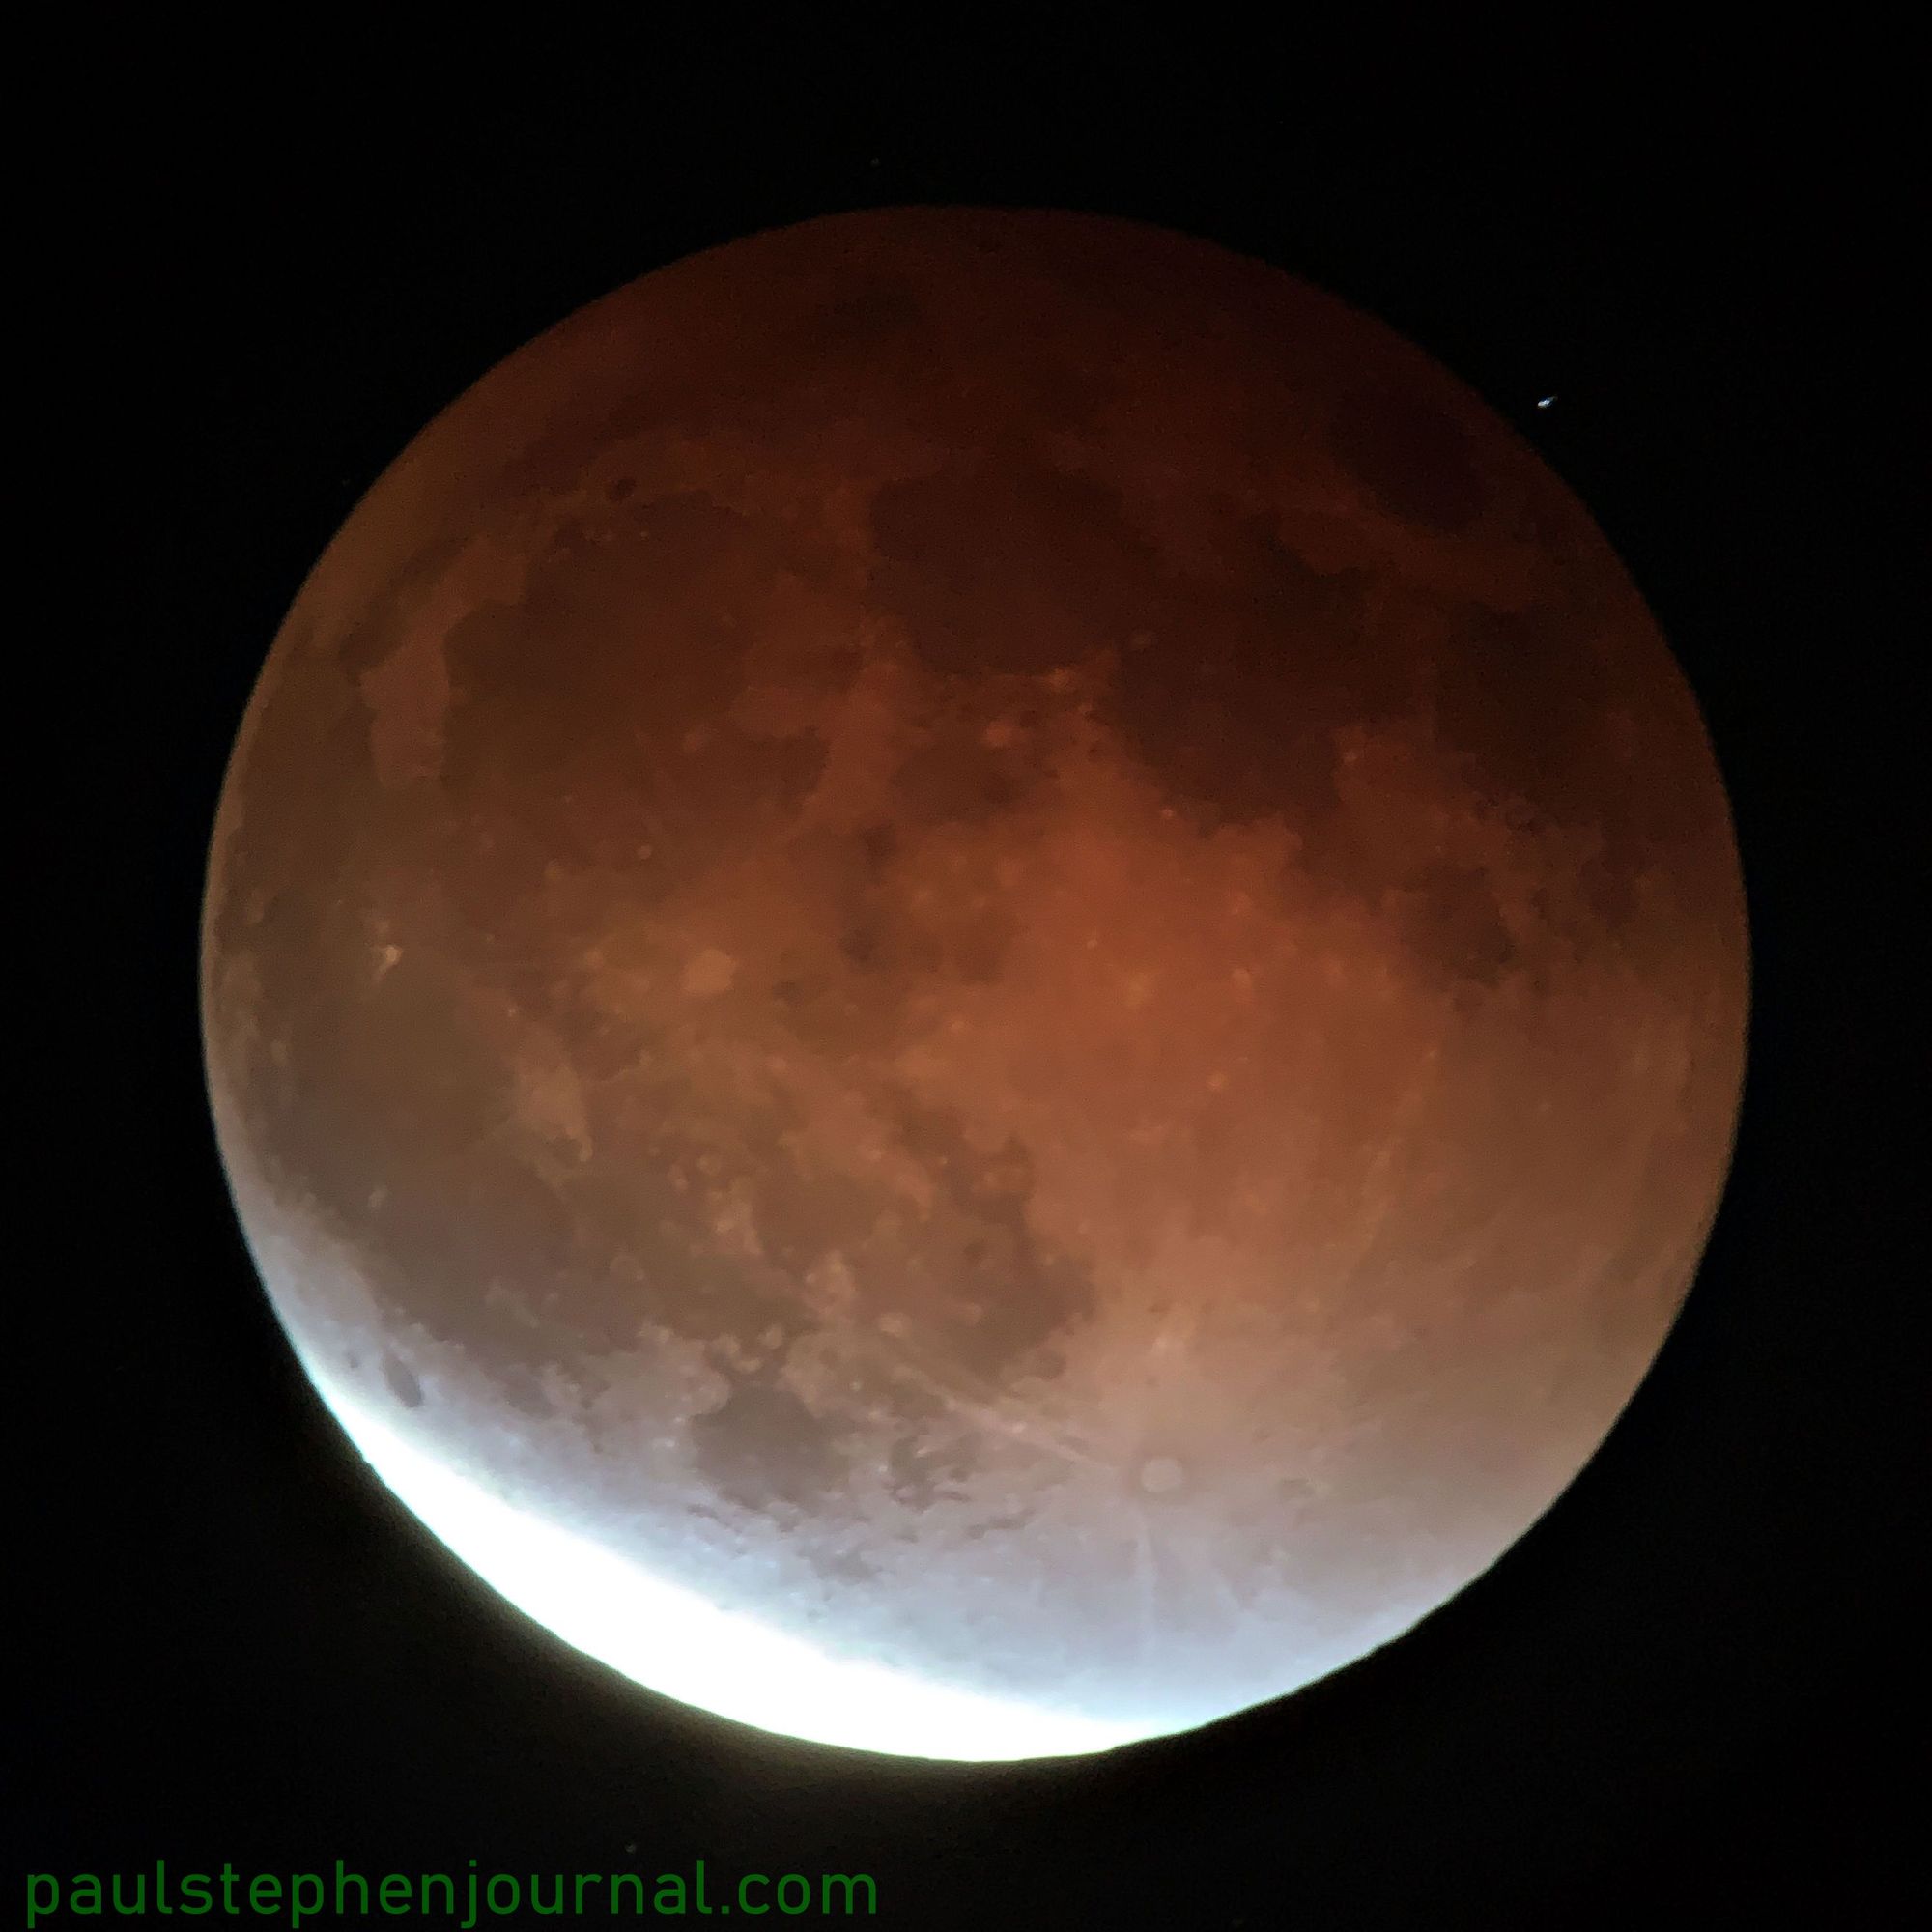 Weather Reports from the May 2022 Lunar Eclipse